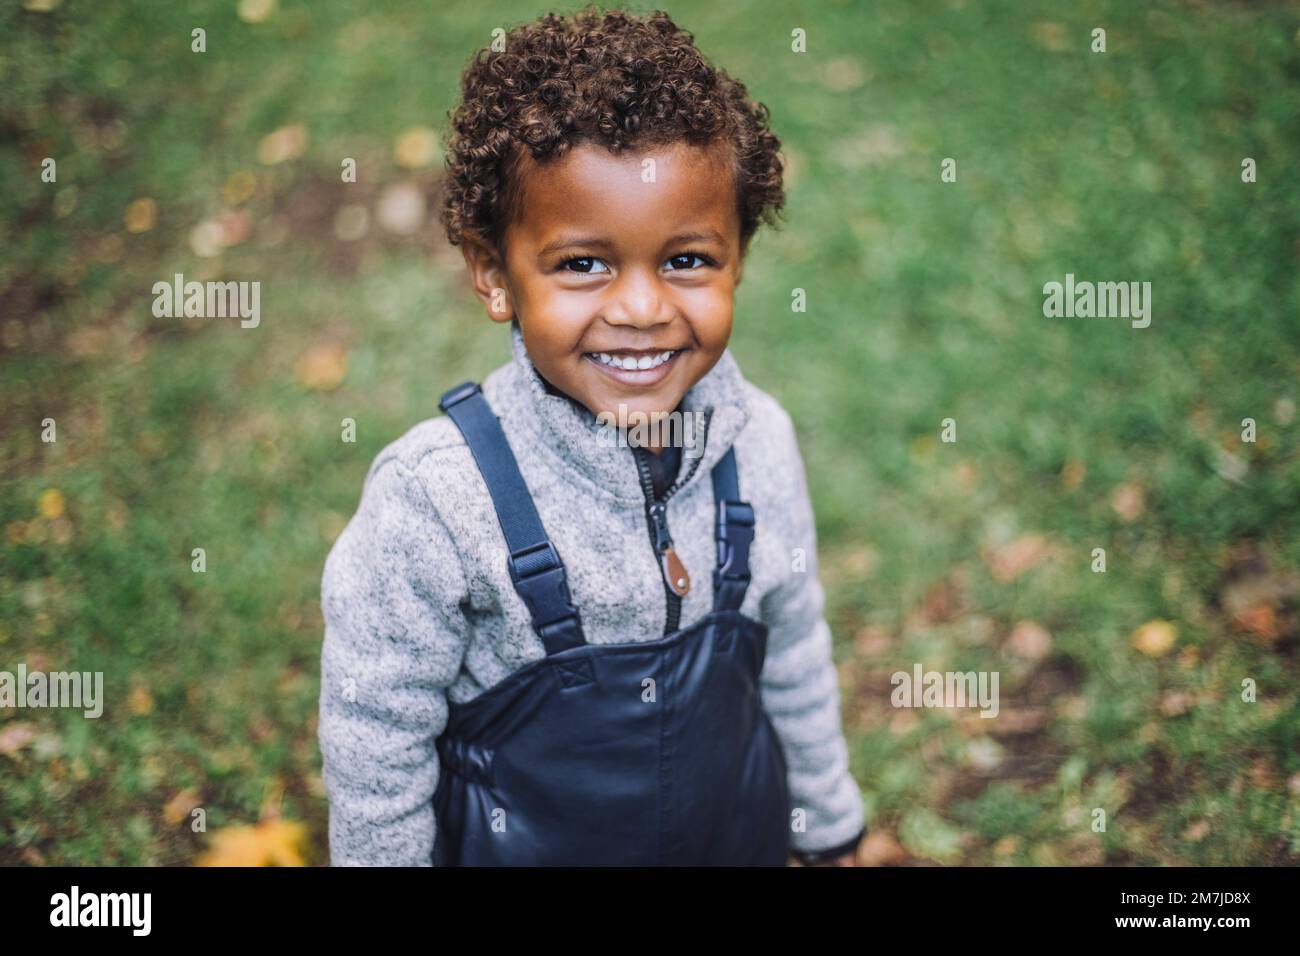 Portrait of smiling boy standing in park Stock Photo